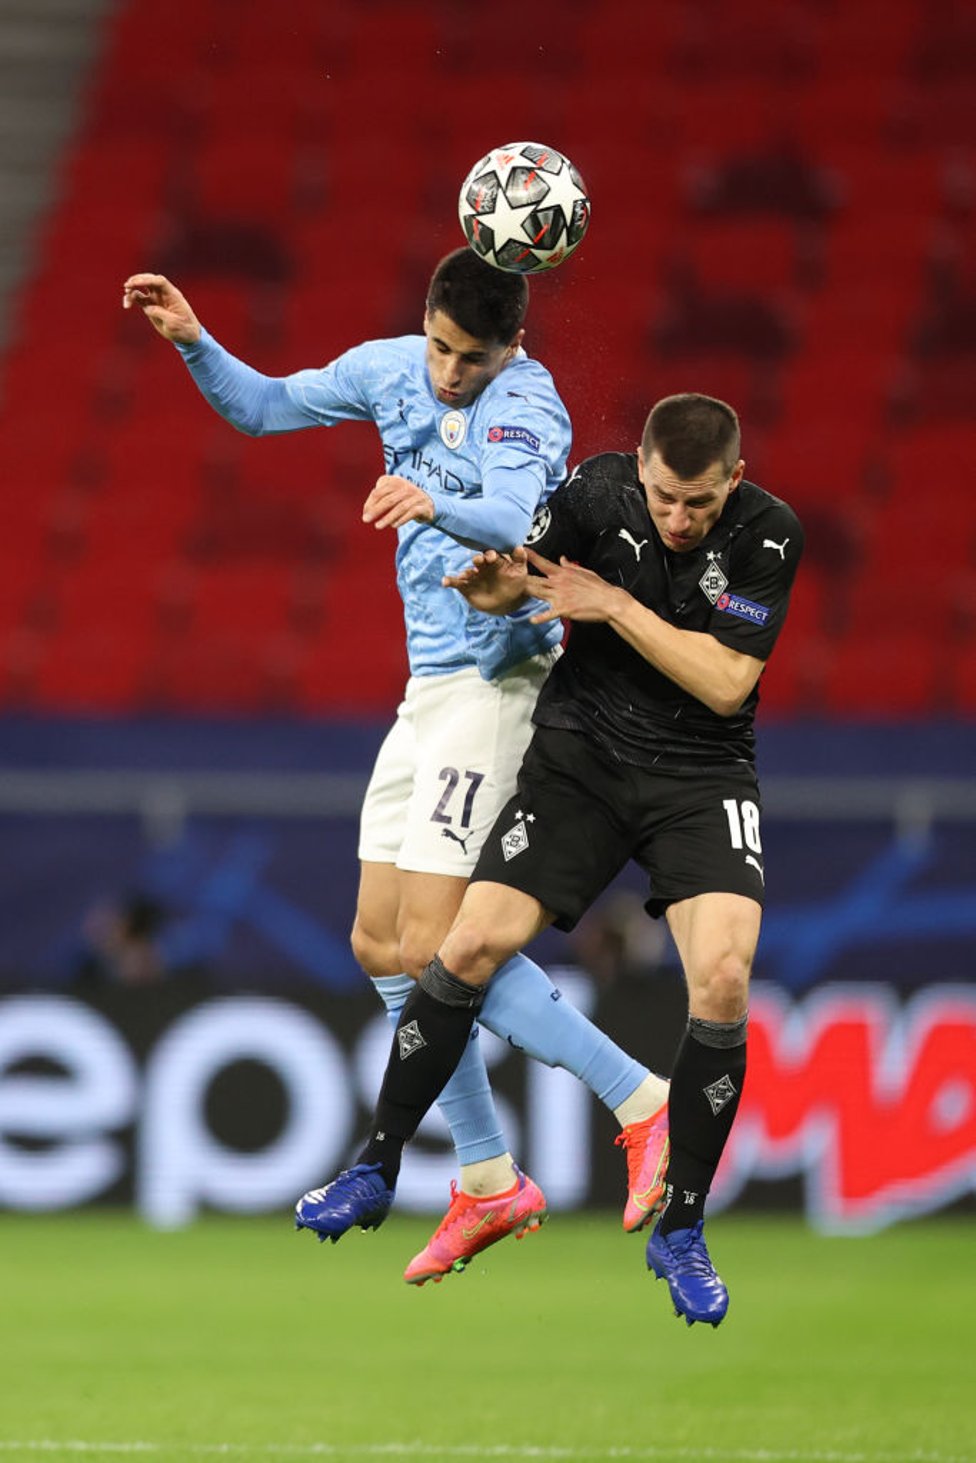 CANCELO’D OUT: Joao Cancelo rises highest to clear the danger